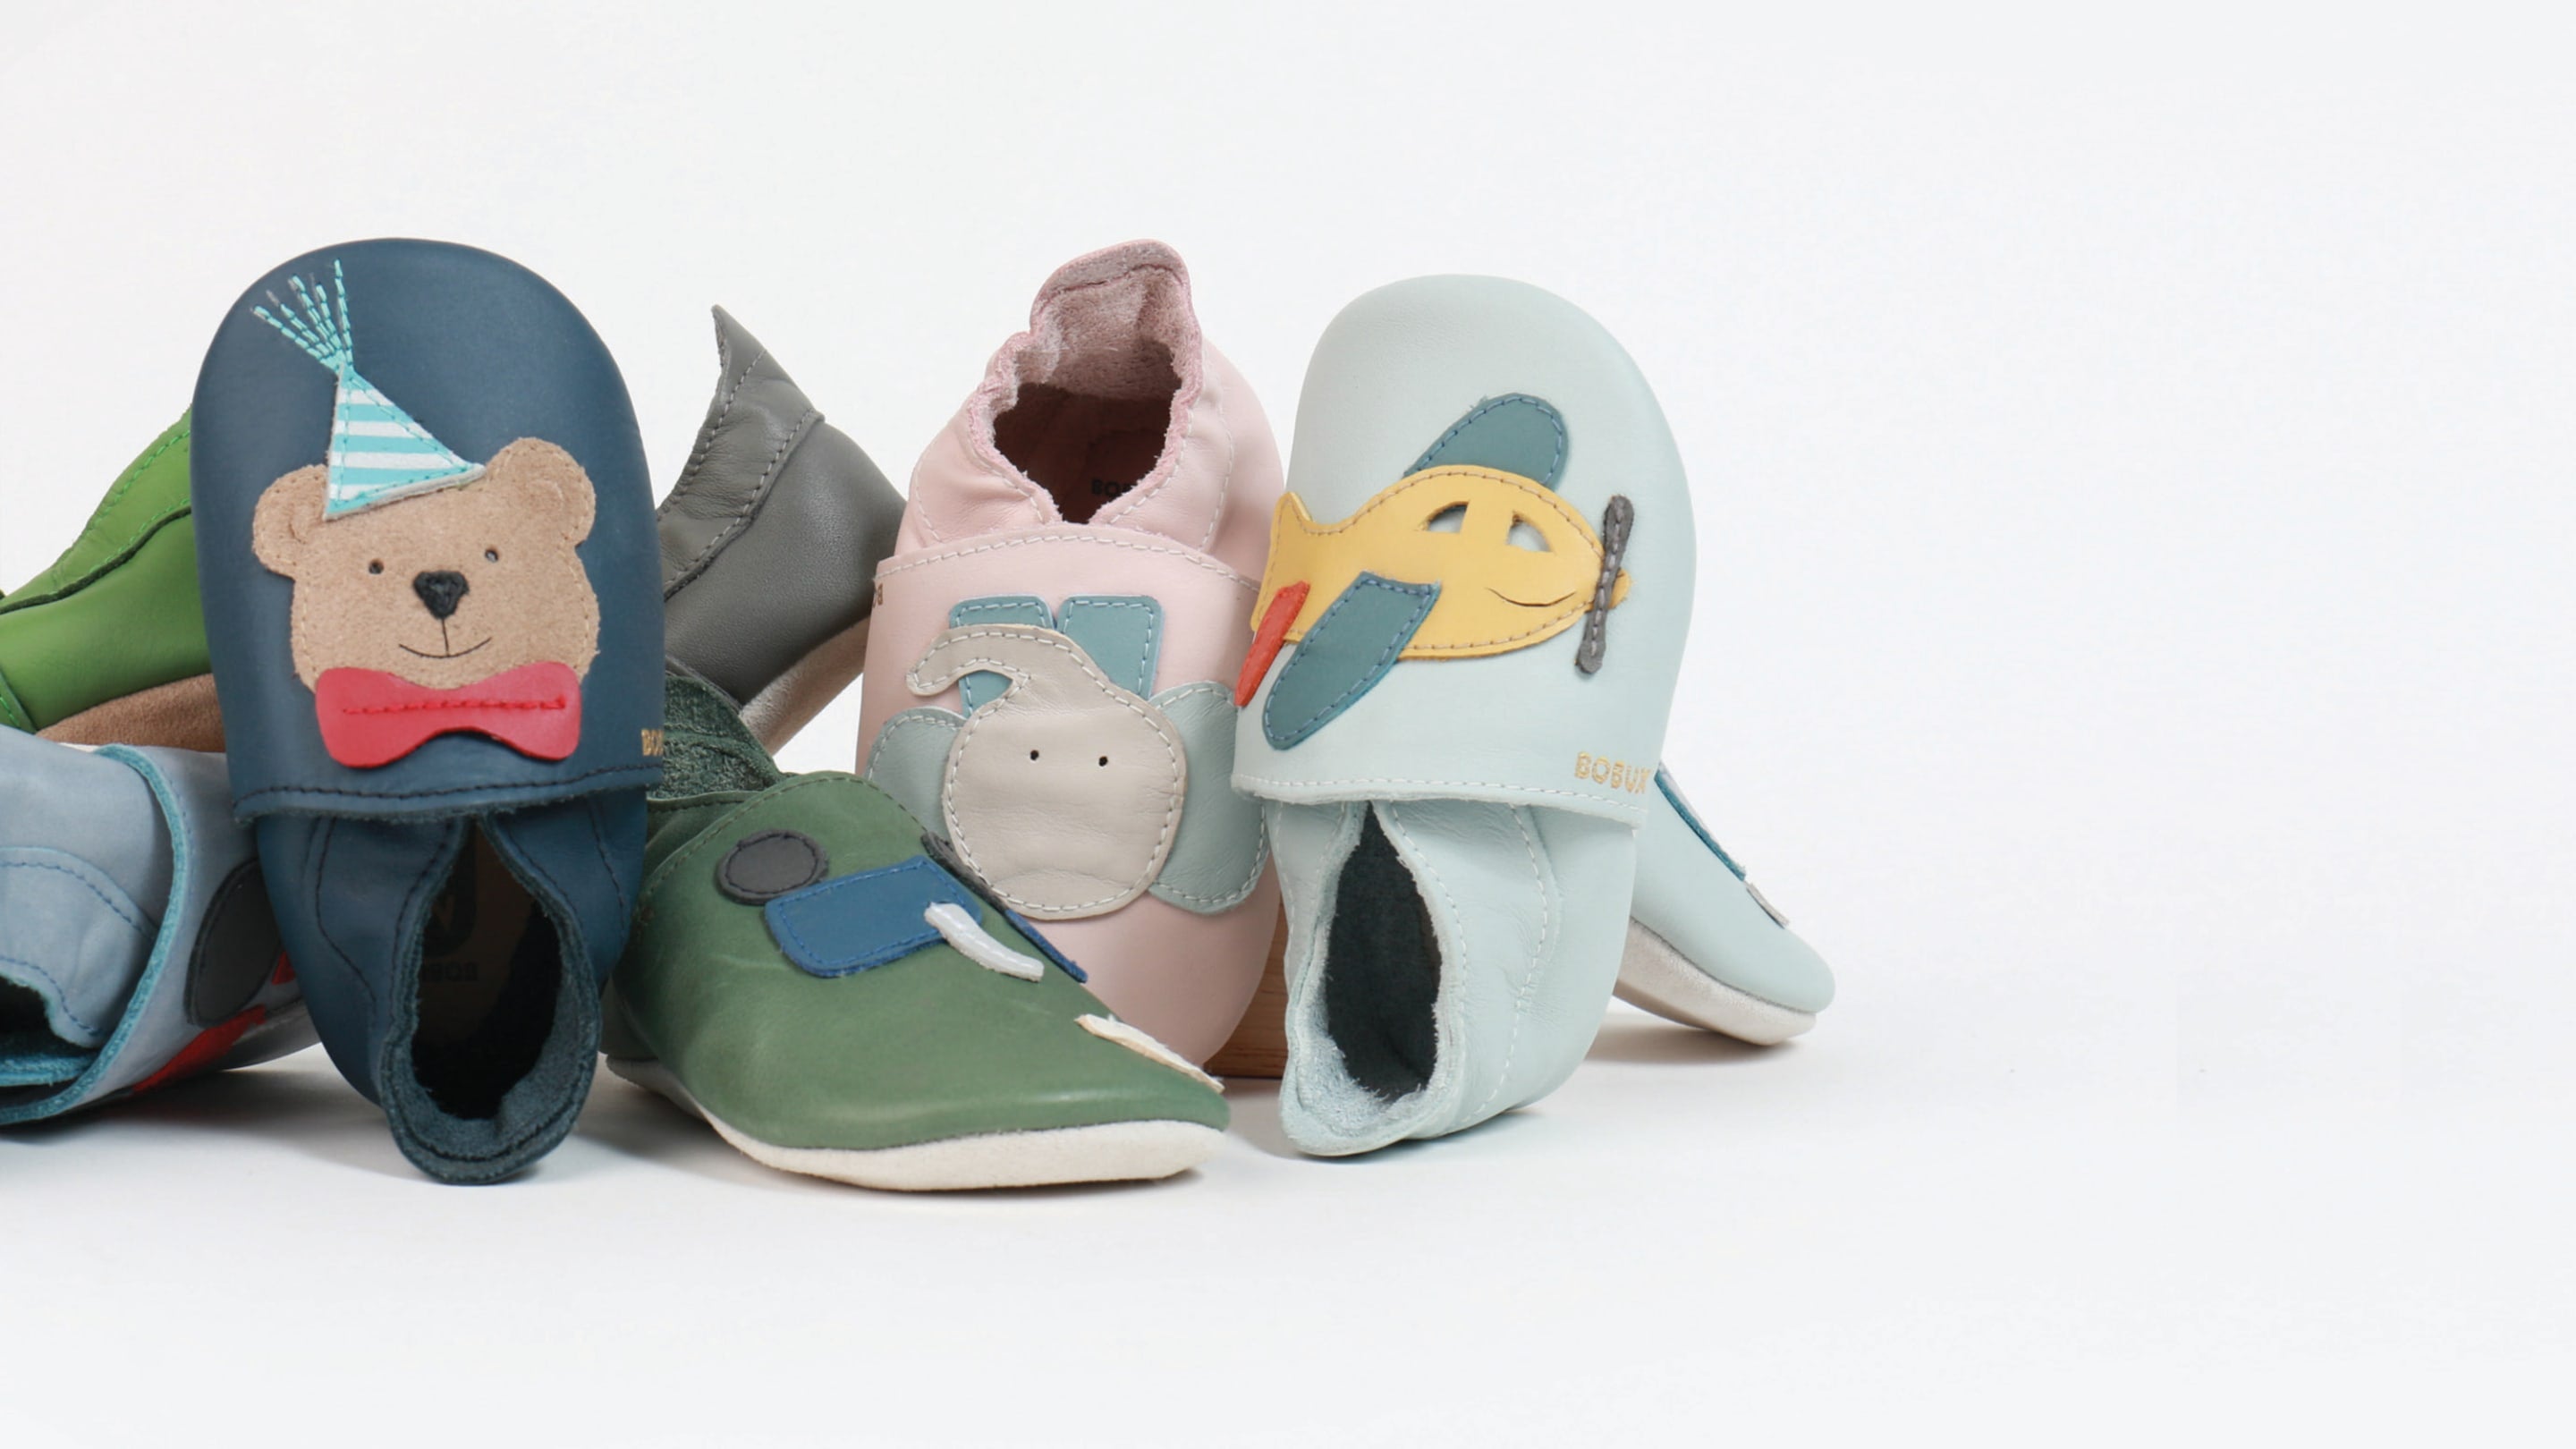 Bobux Babbucce Soft Soles in Pelle per bambini, Shop Online PIPI & PUPU and friends